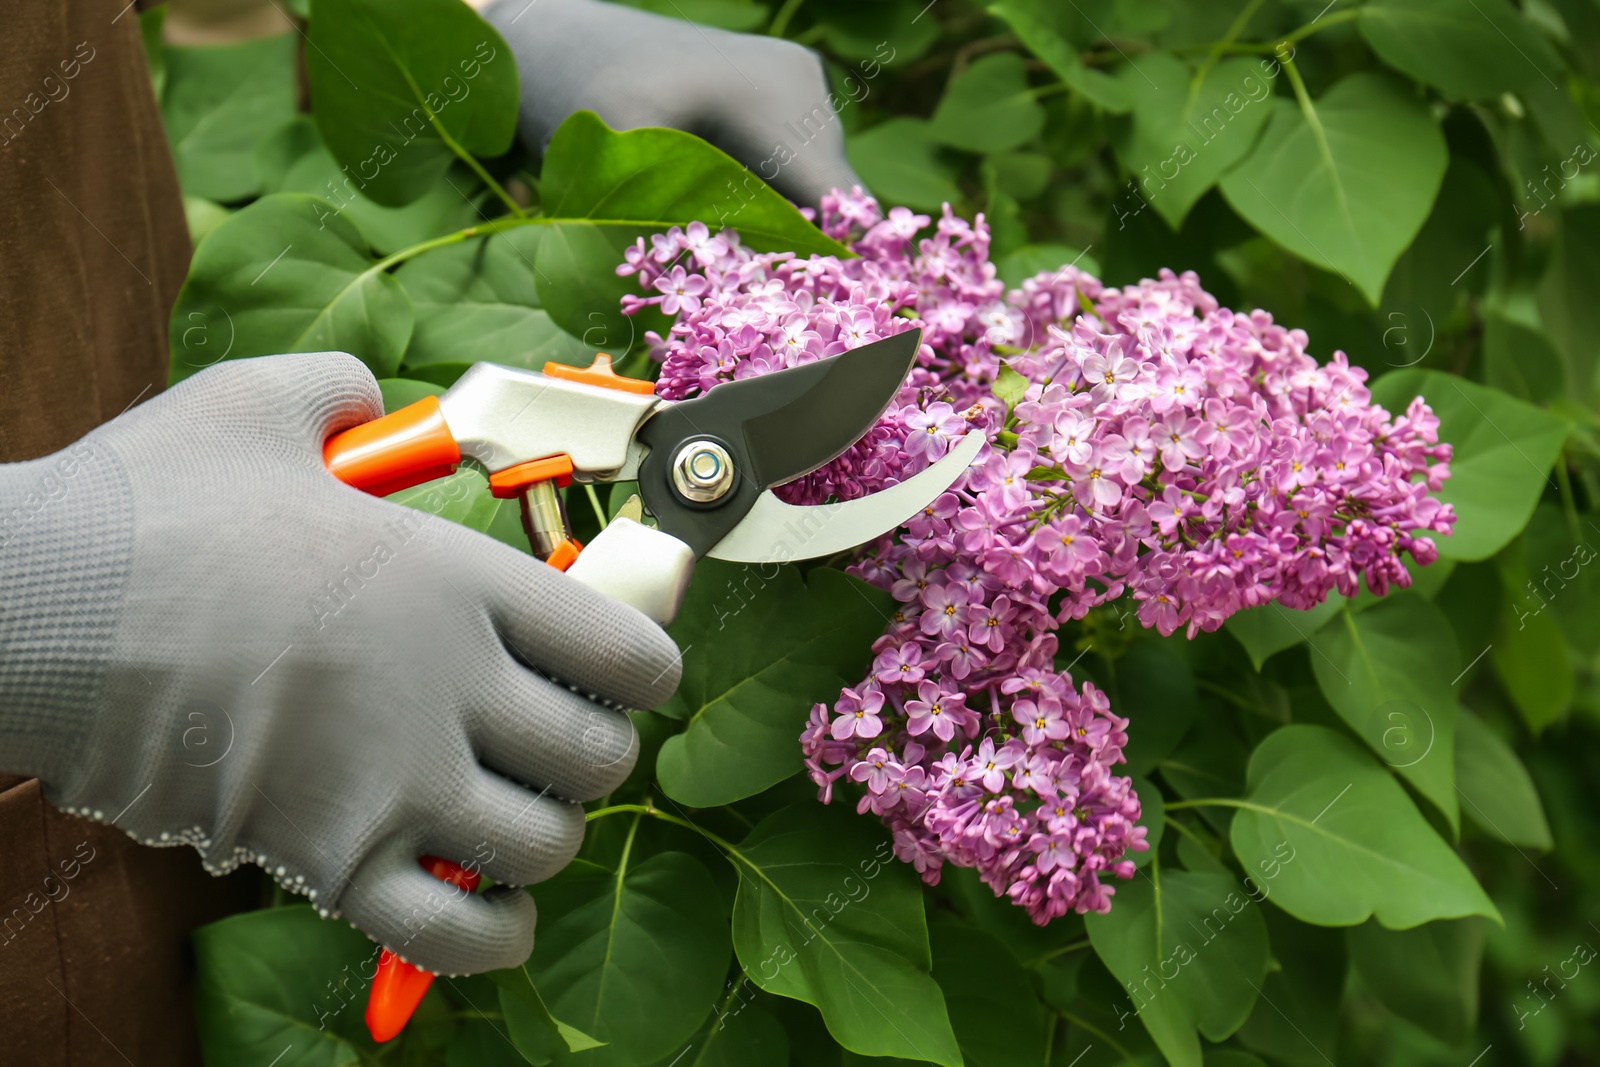 Photo of Gardener pruning lilac branch with secateurs outdoors, closeup